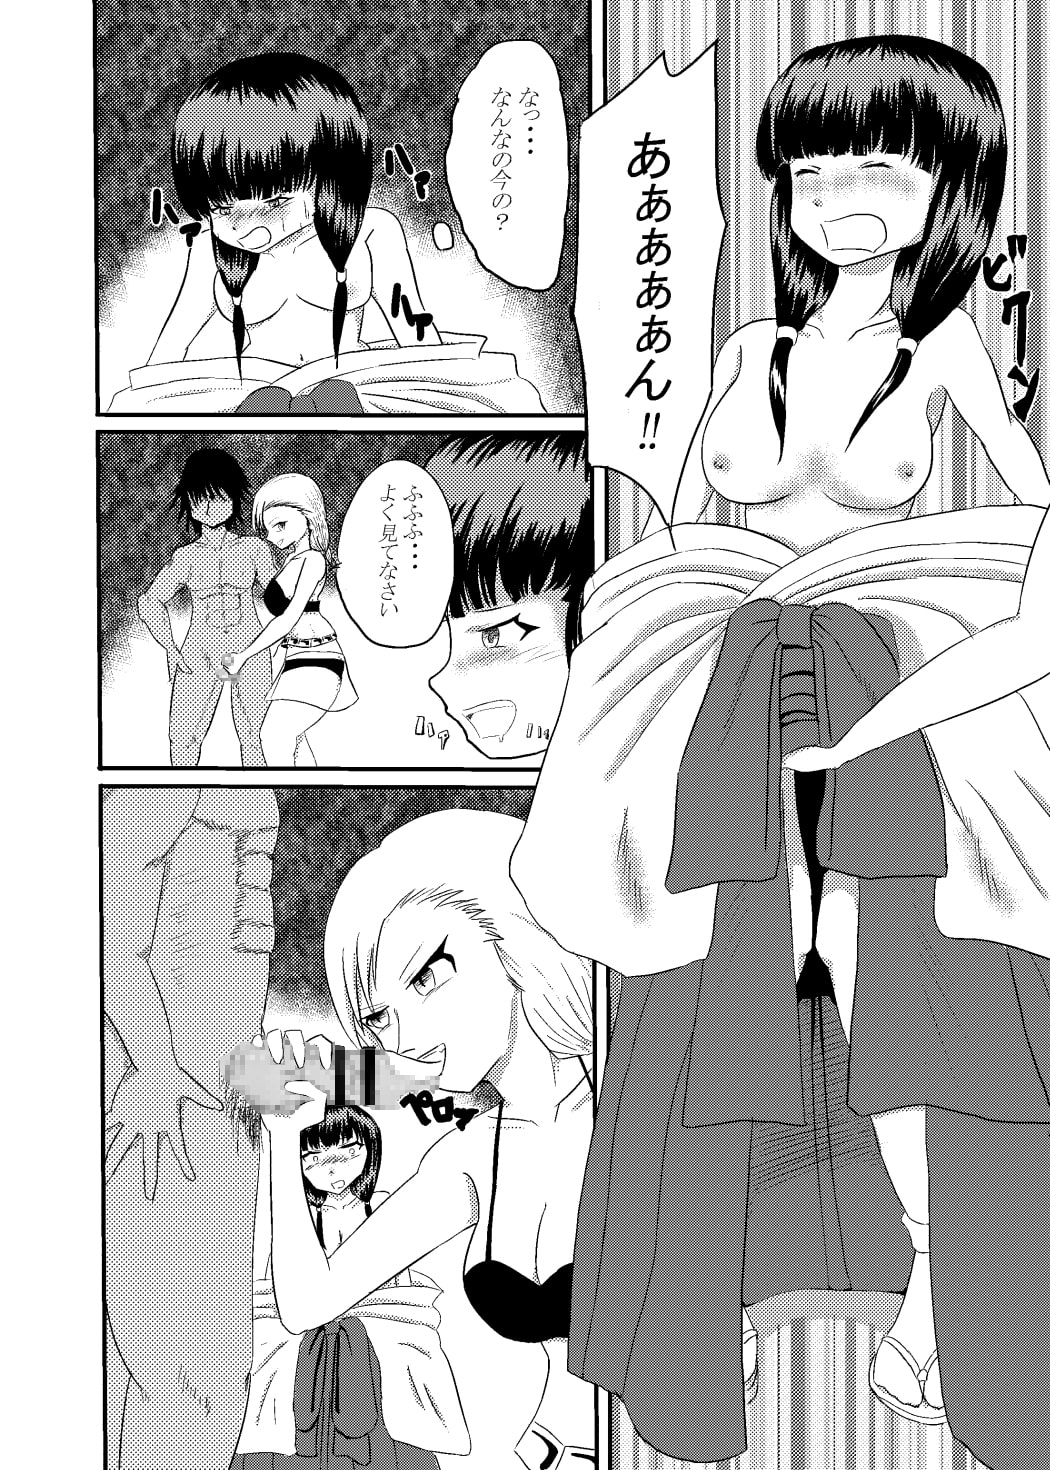 A shrine maiden is lewdly corrupted